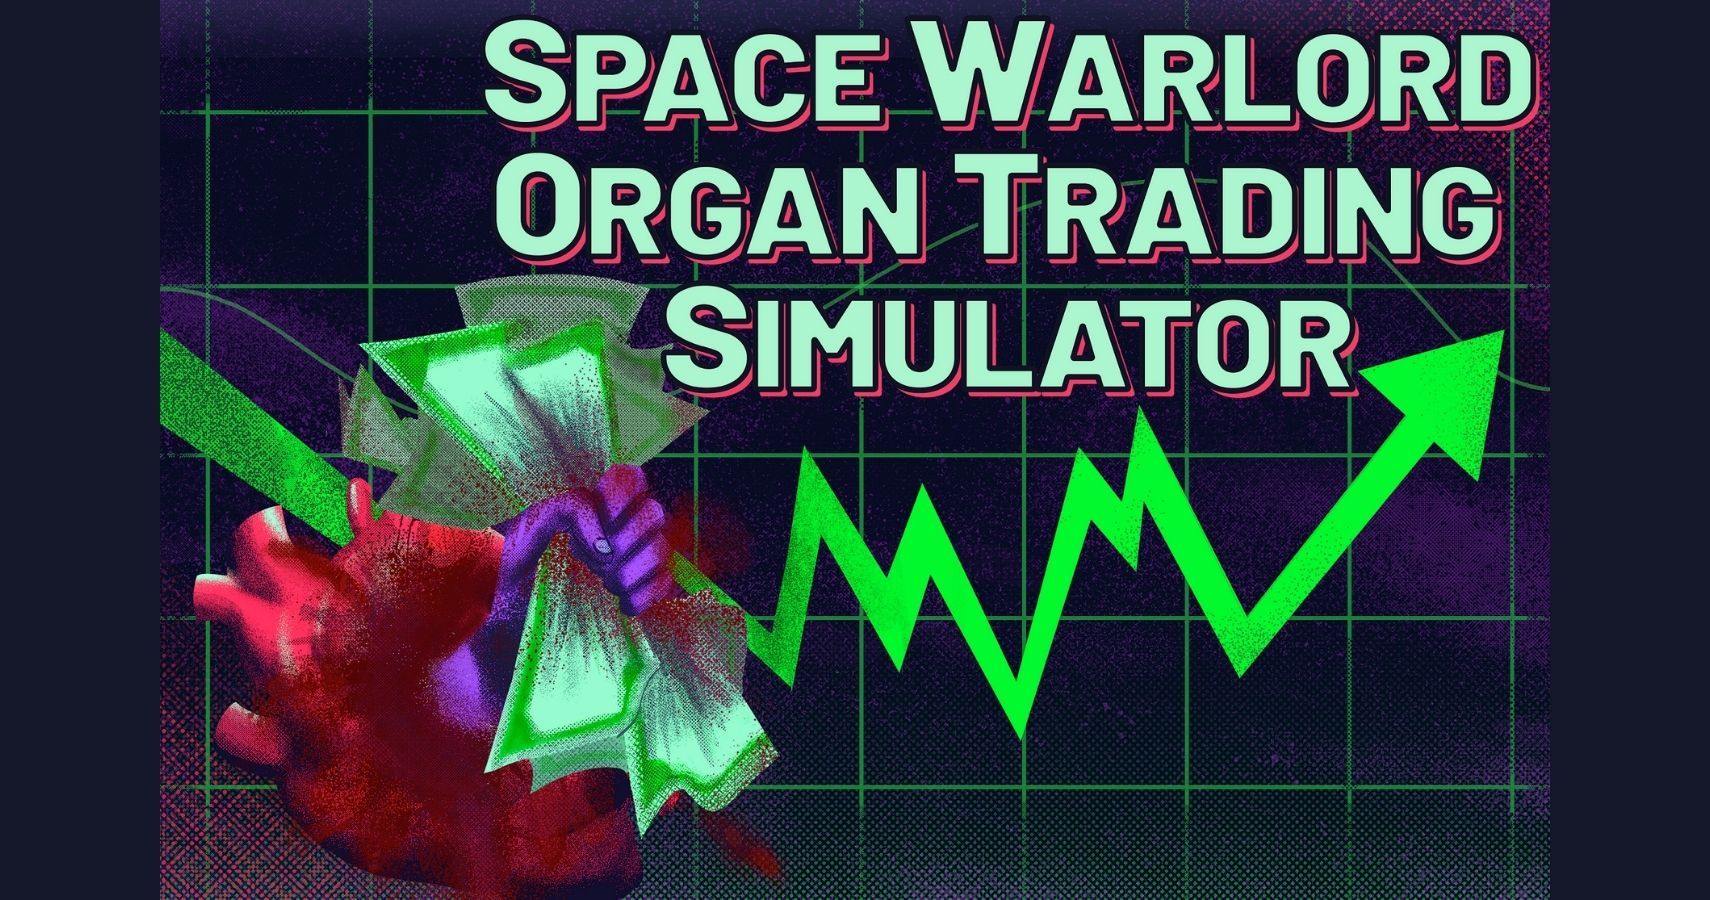 Space Warlord Organ Trading Simulator Announcement feature image